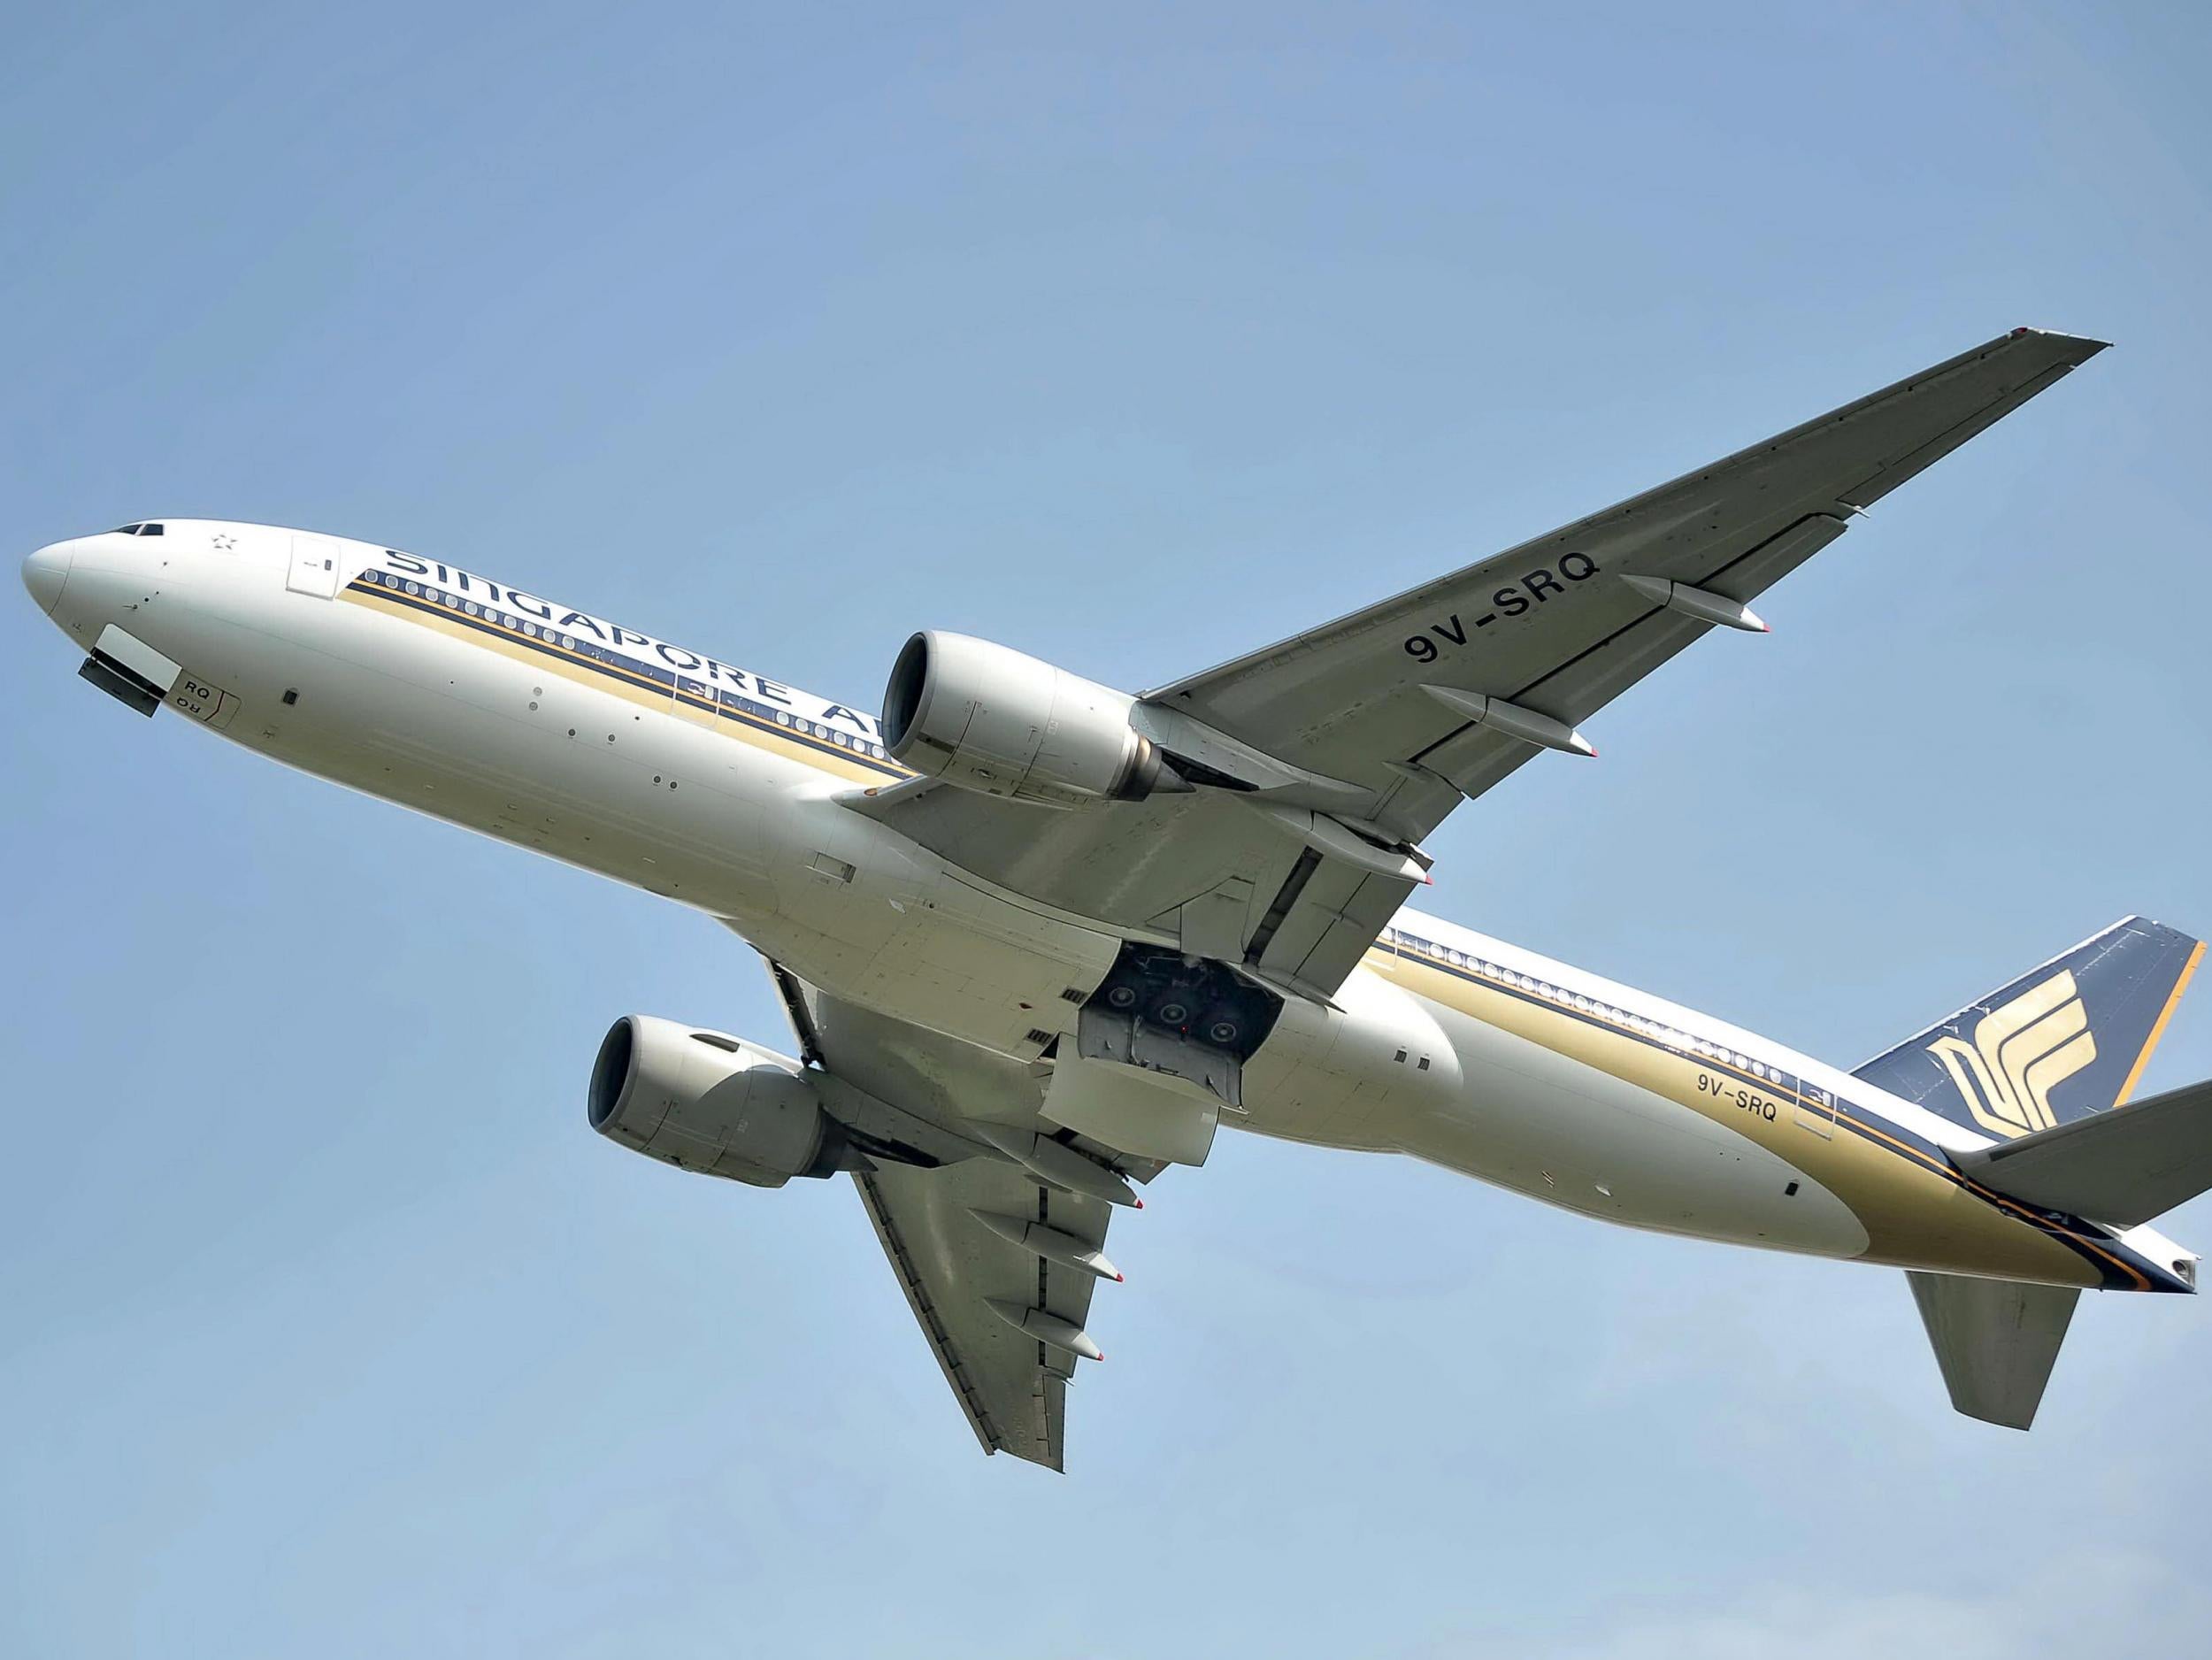 The Singapore Airlines flight had been travelling from New Delhi to Singapore